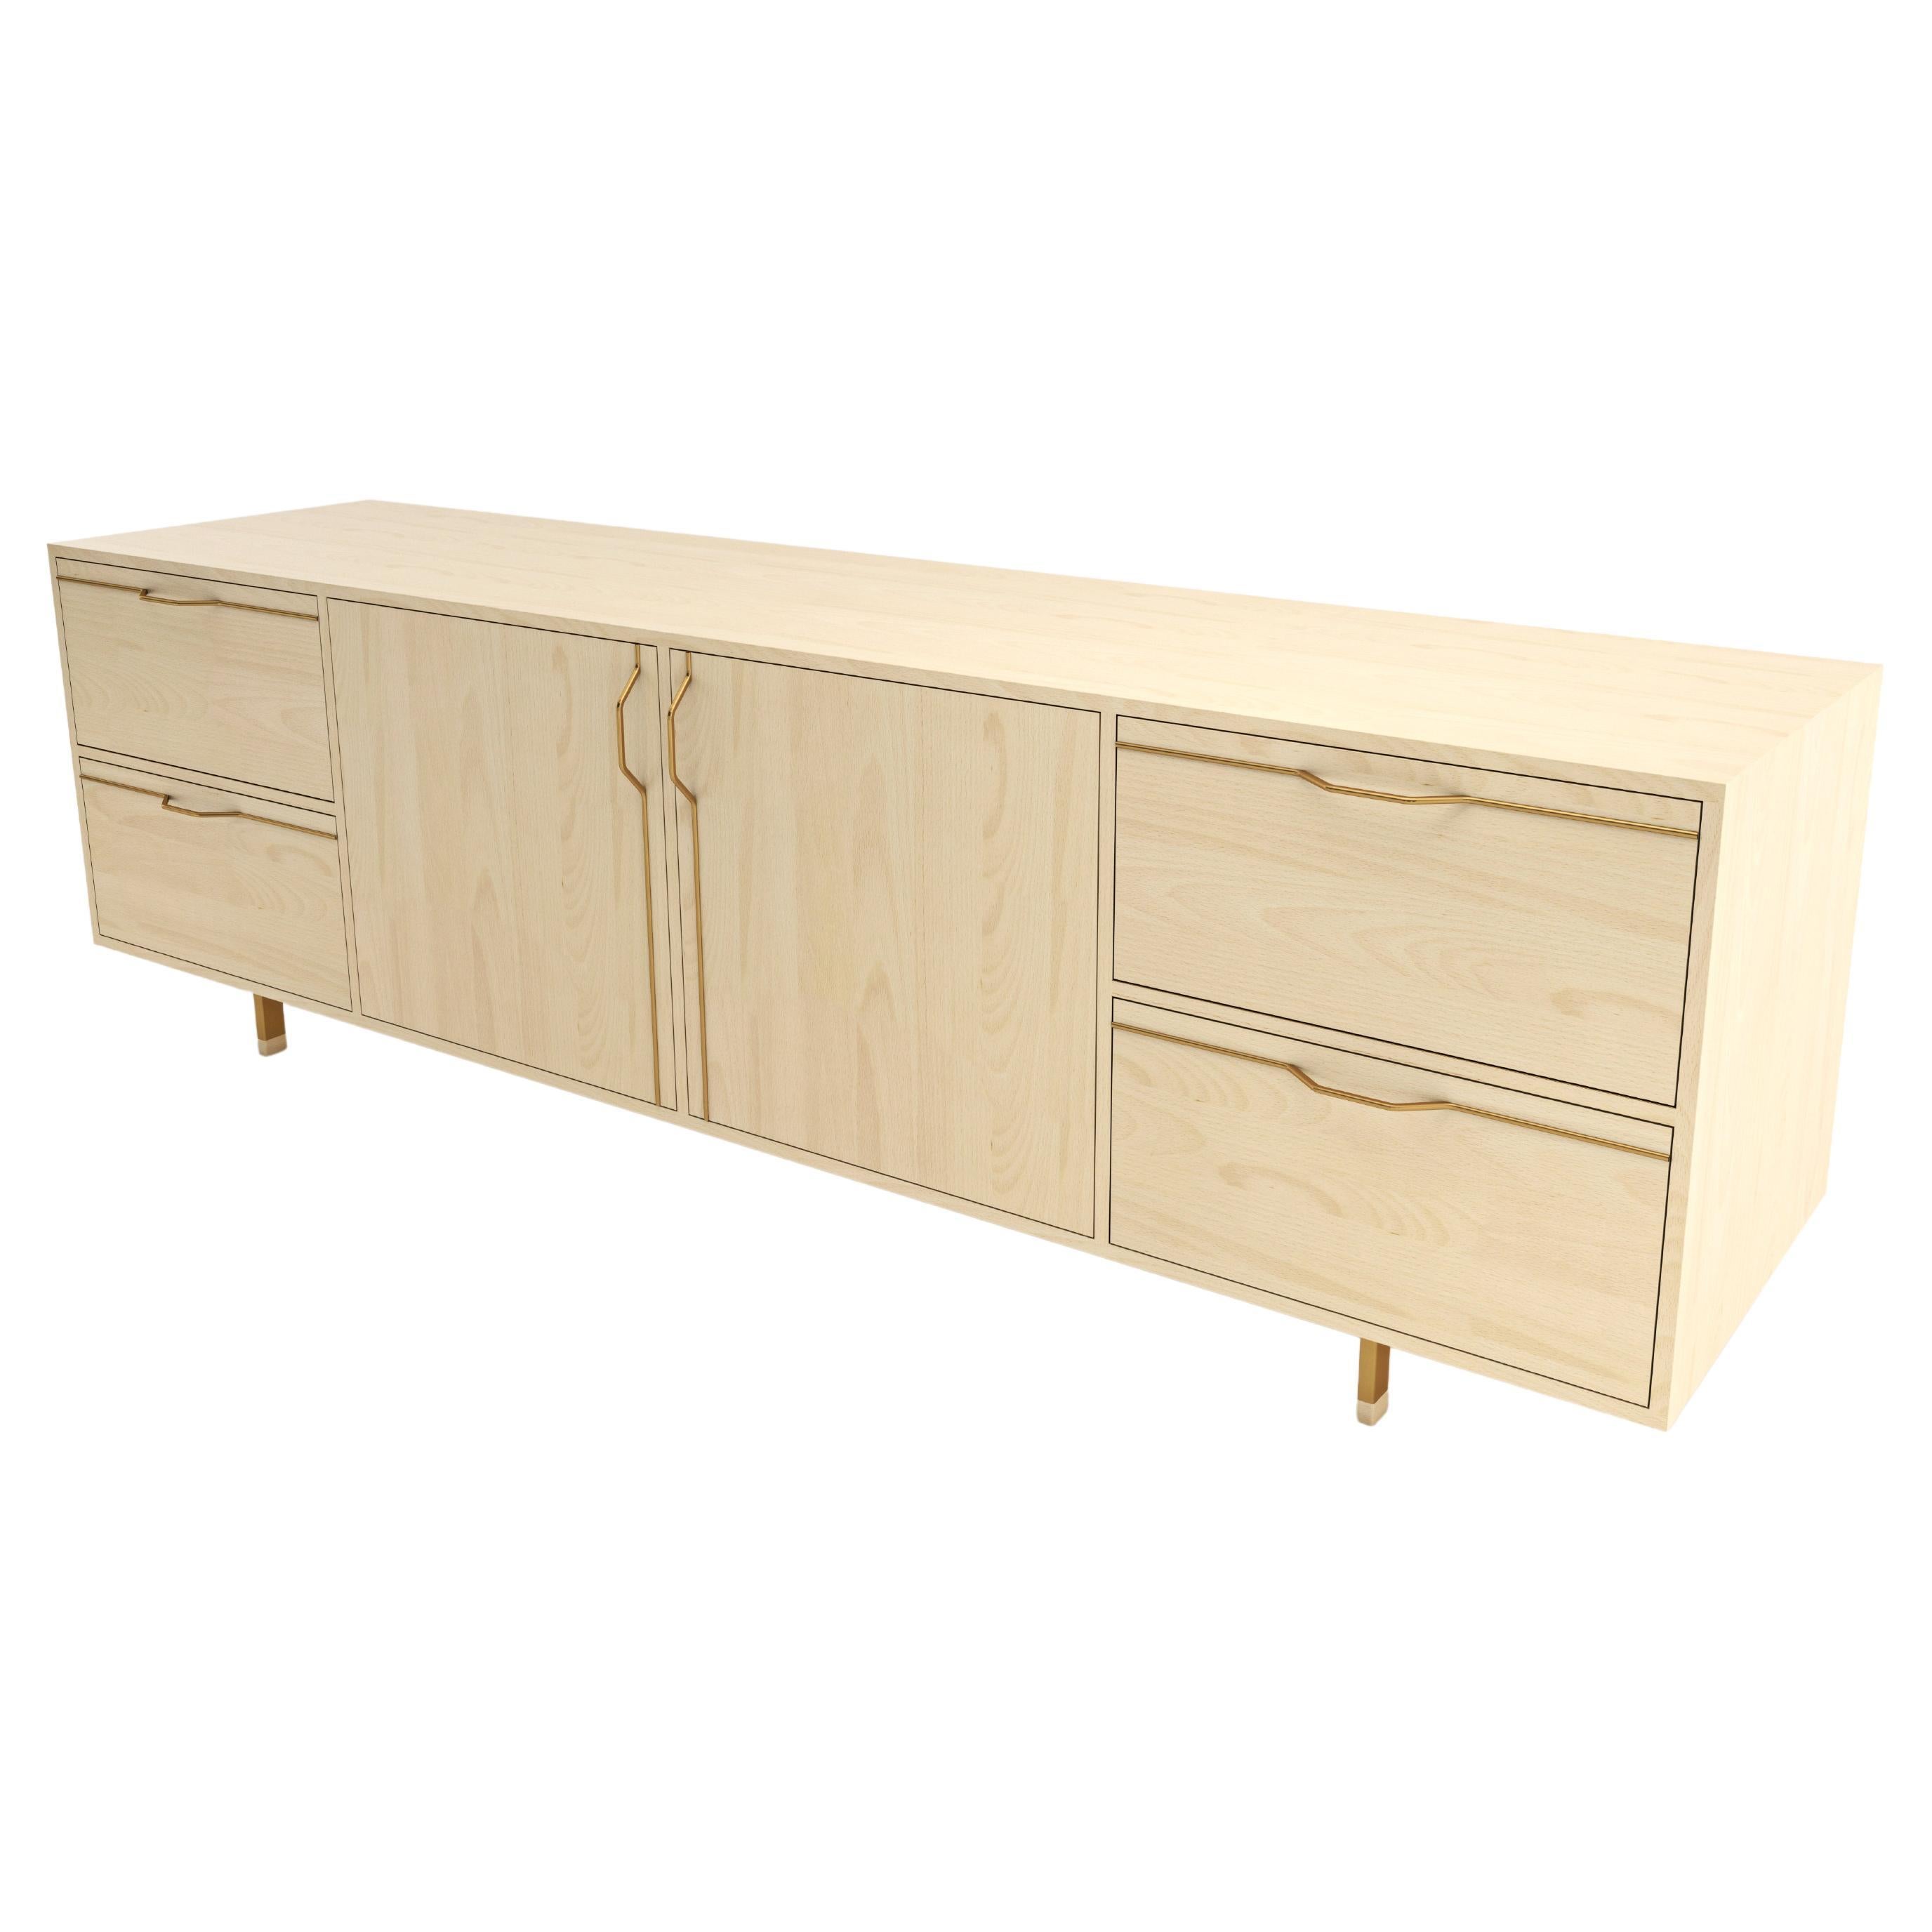 Chapman Large Credenza Storage Unit Maple Brassy Gold For Sale